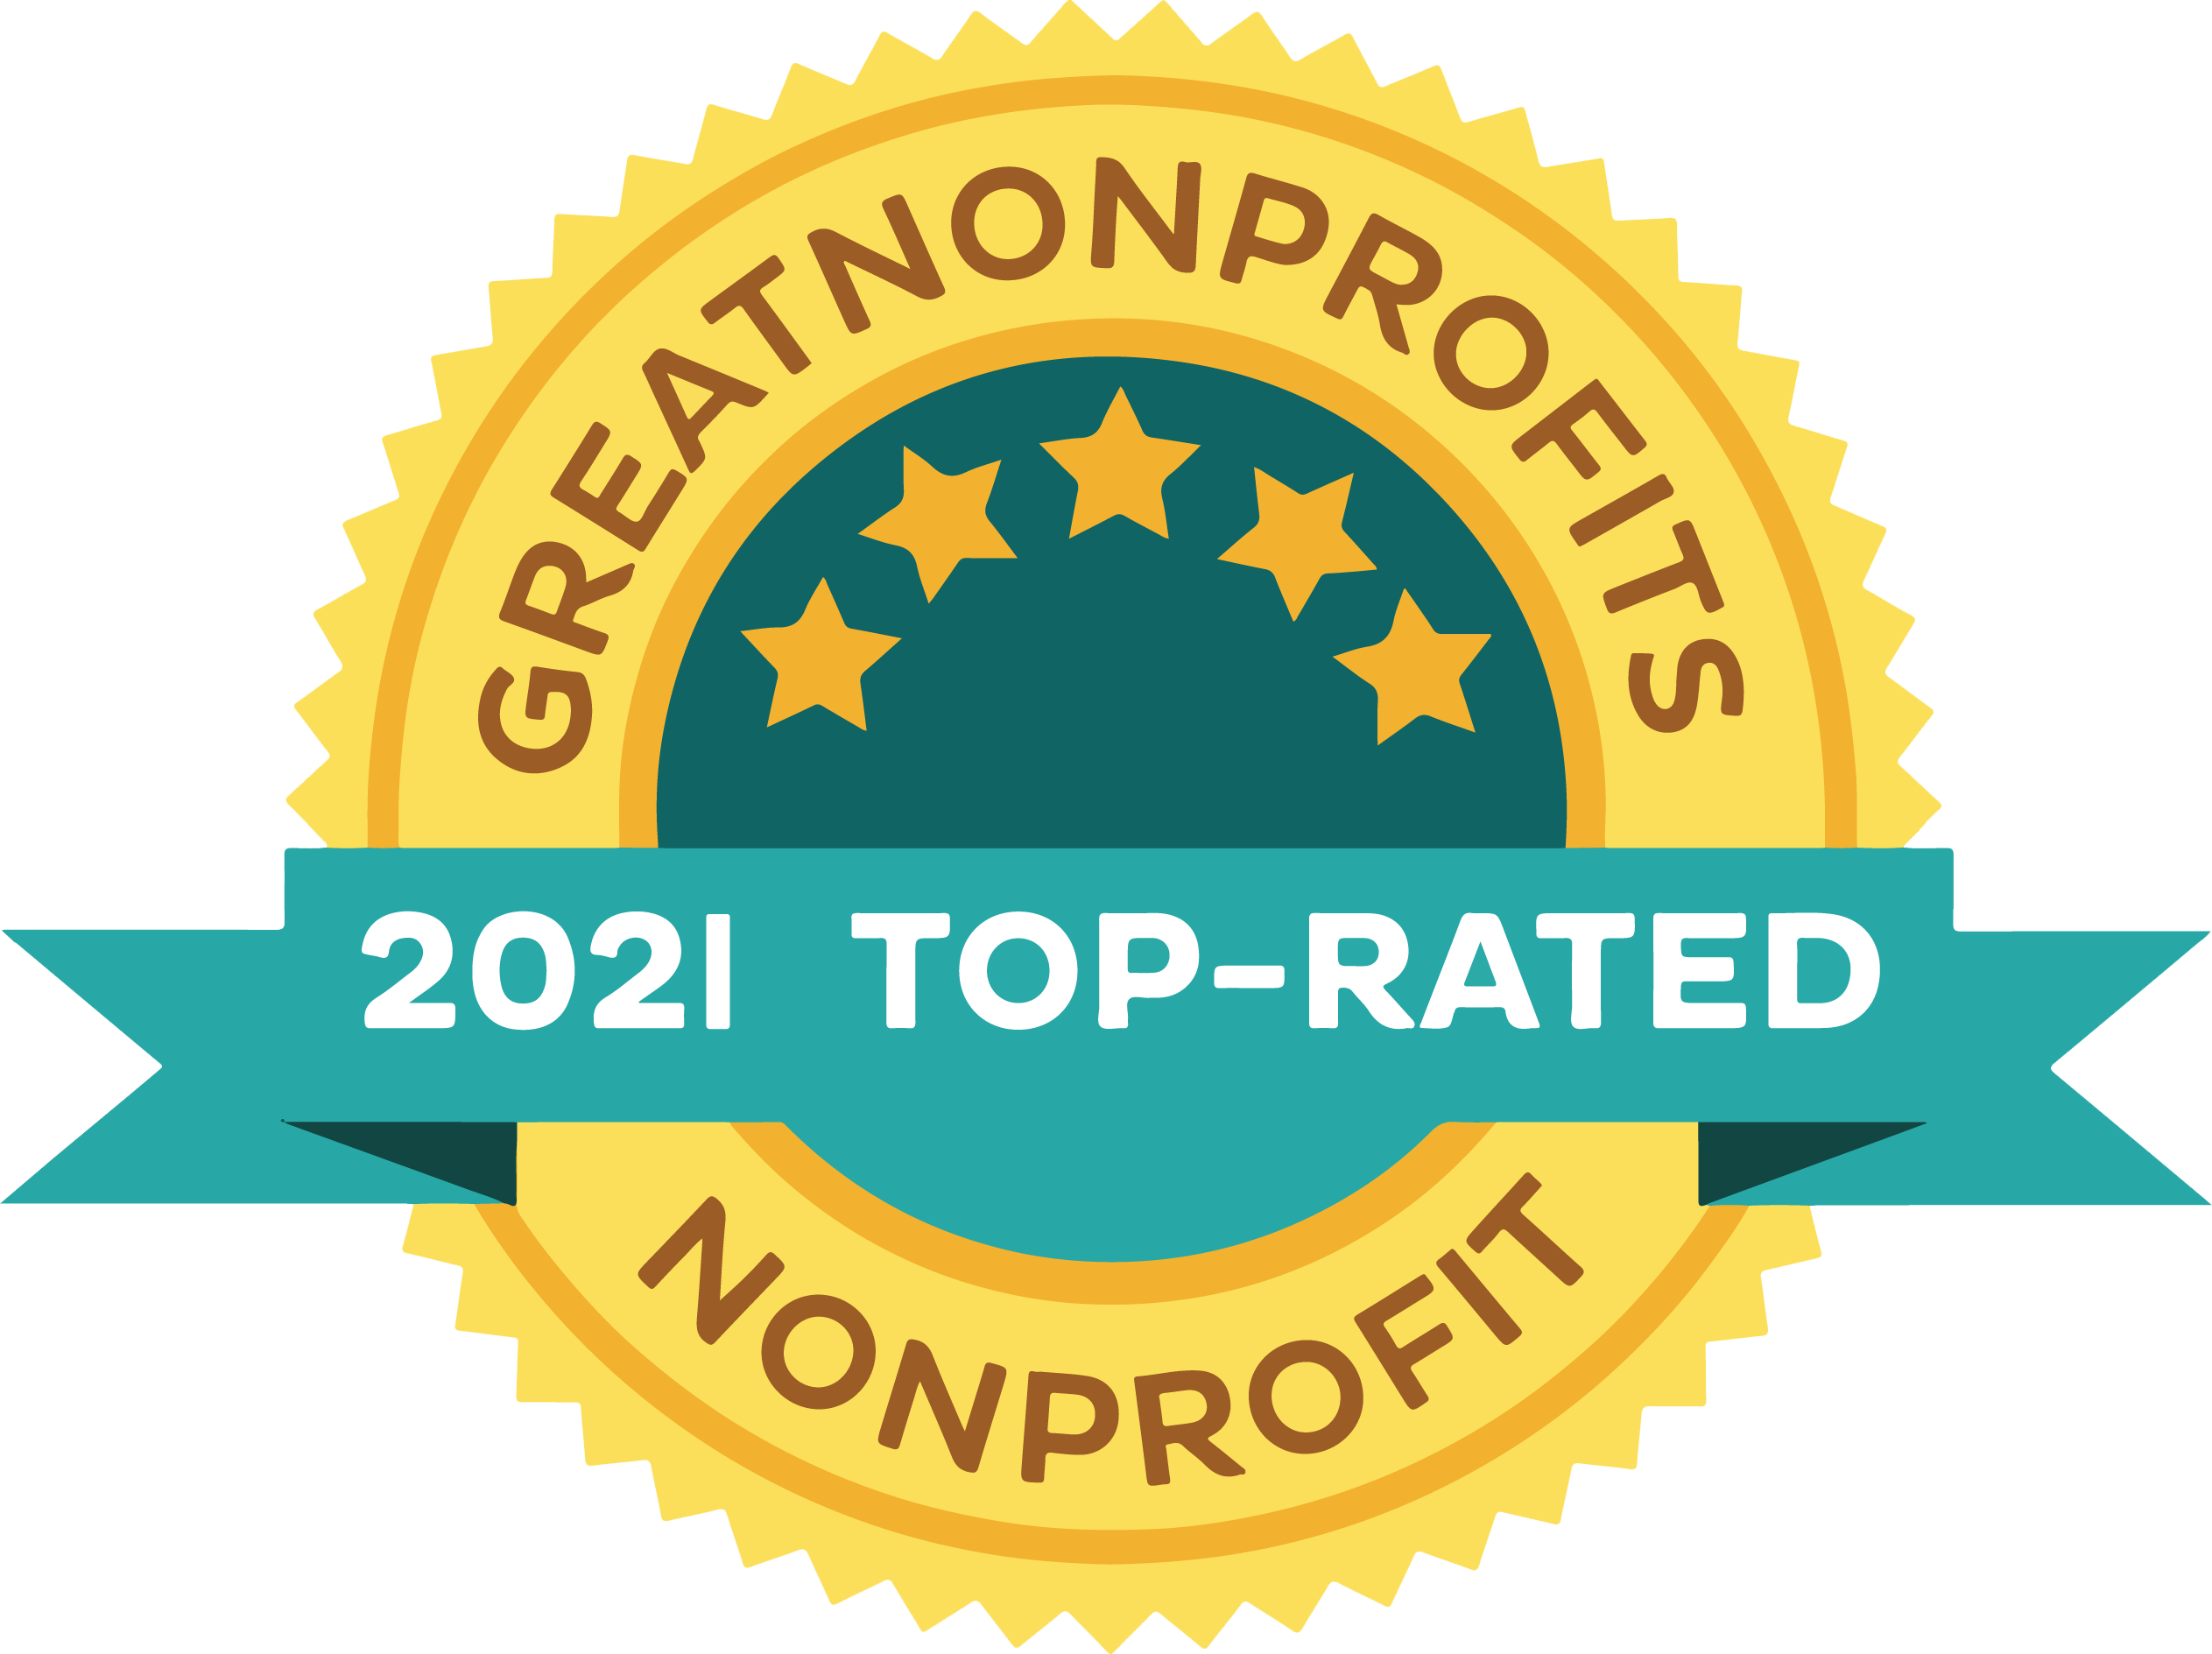 WellLife Network Nonprofit Overview and Reviews on GreatNonprofits